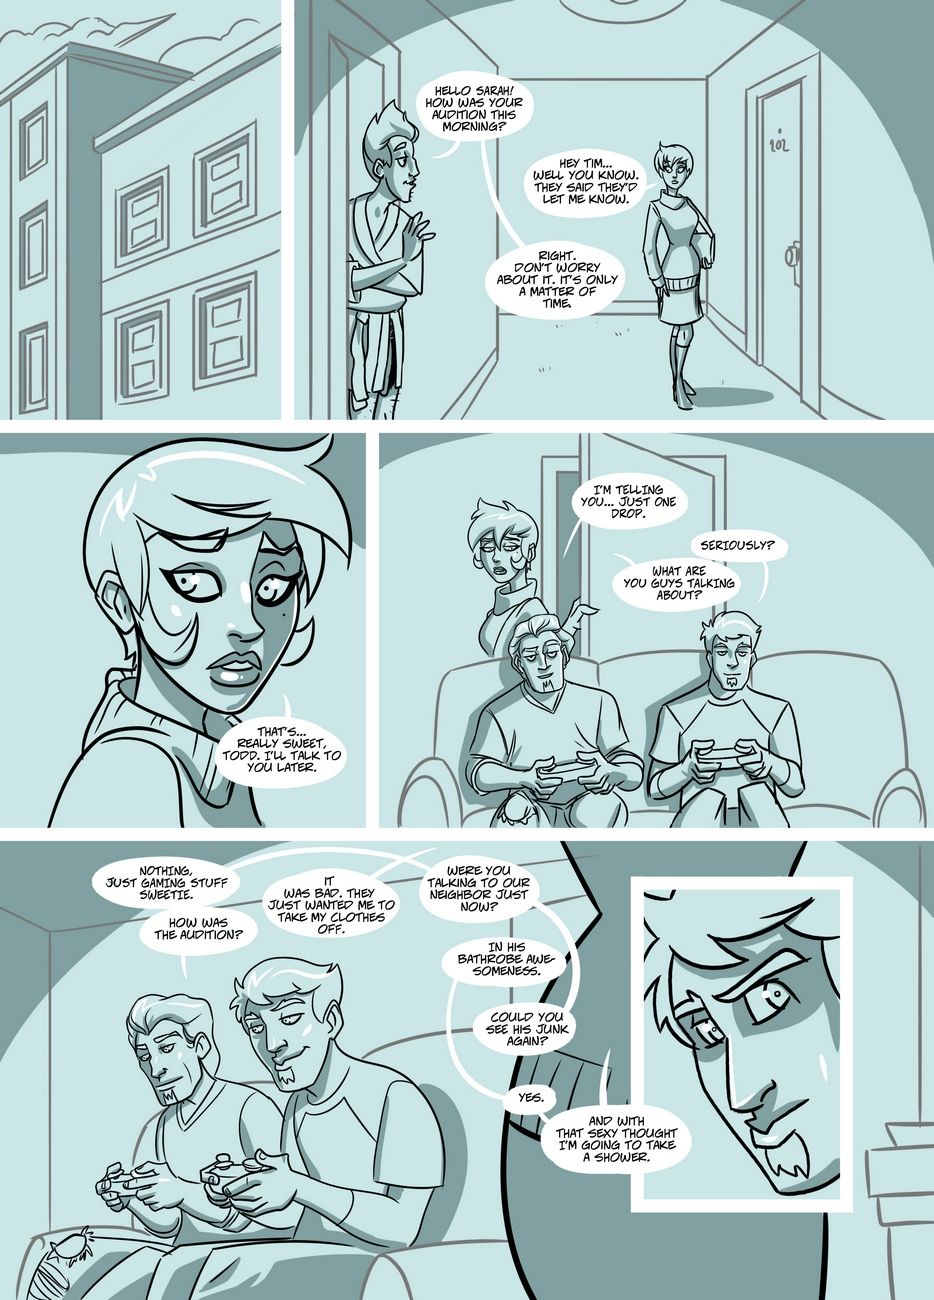 The Roommate - part 2 page 1